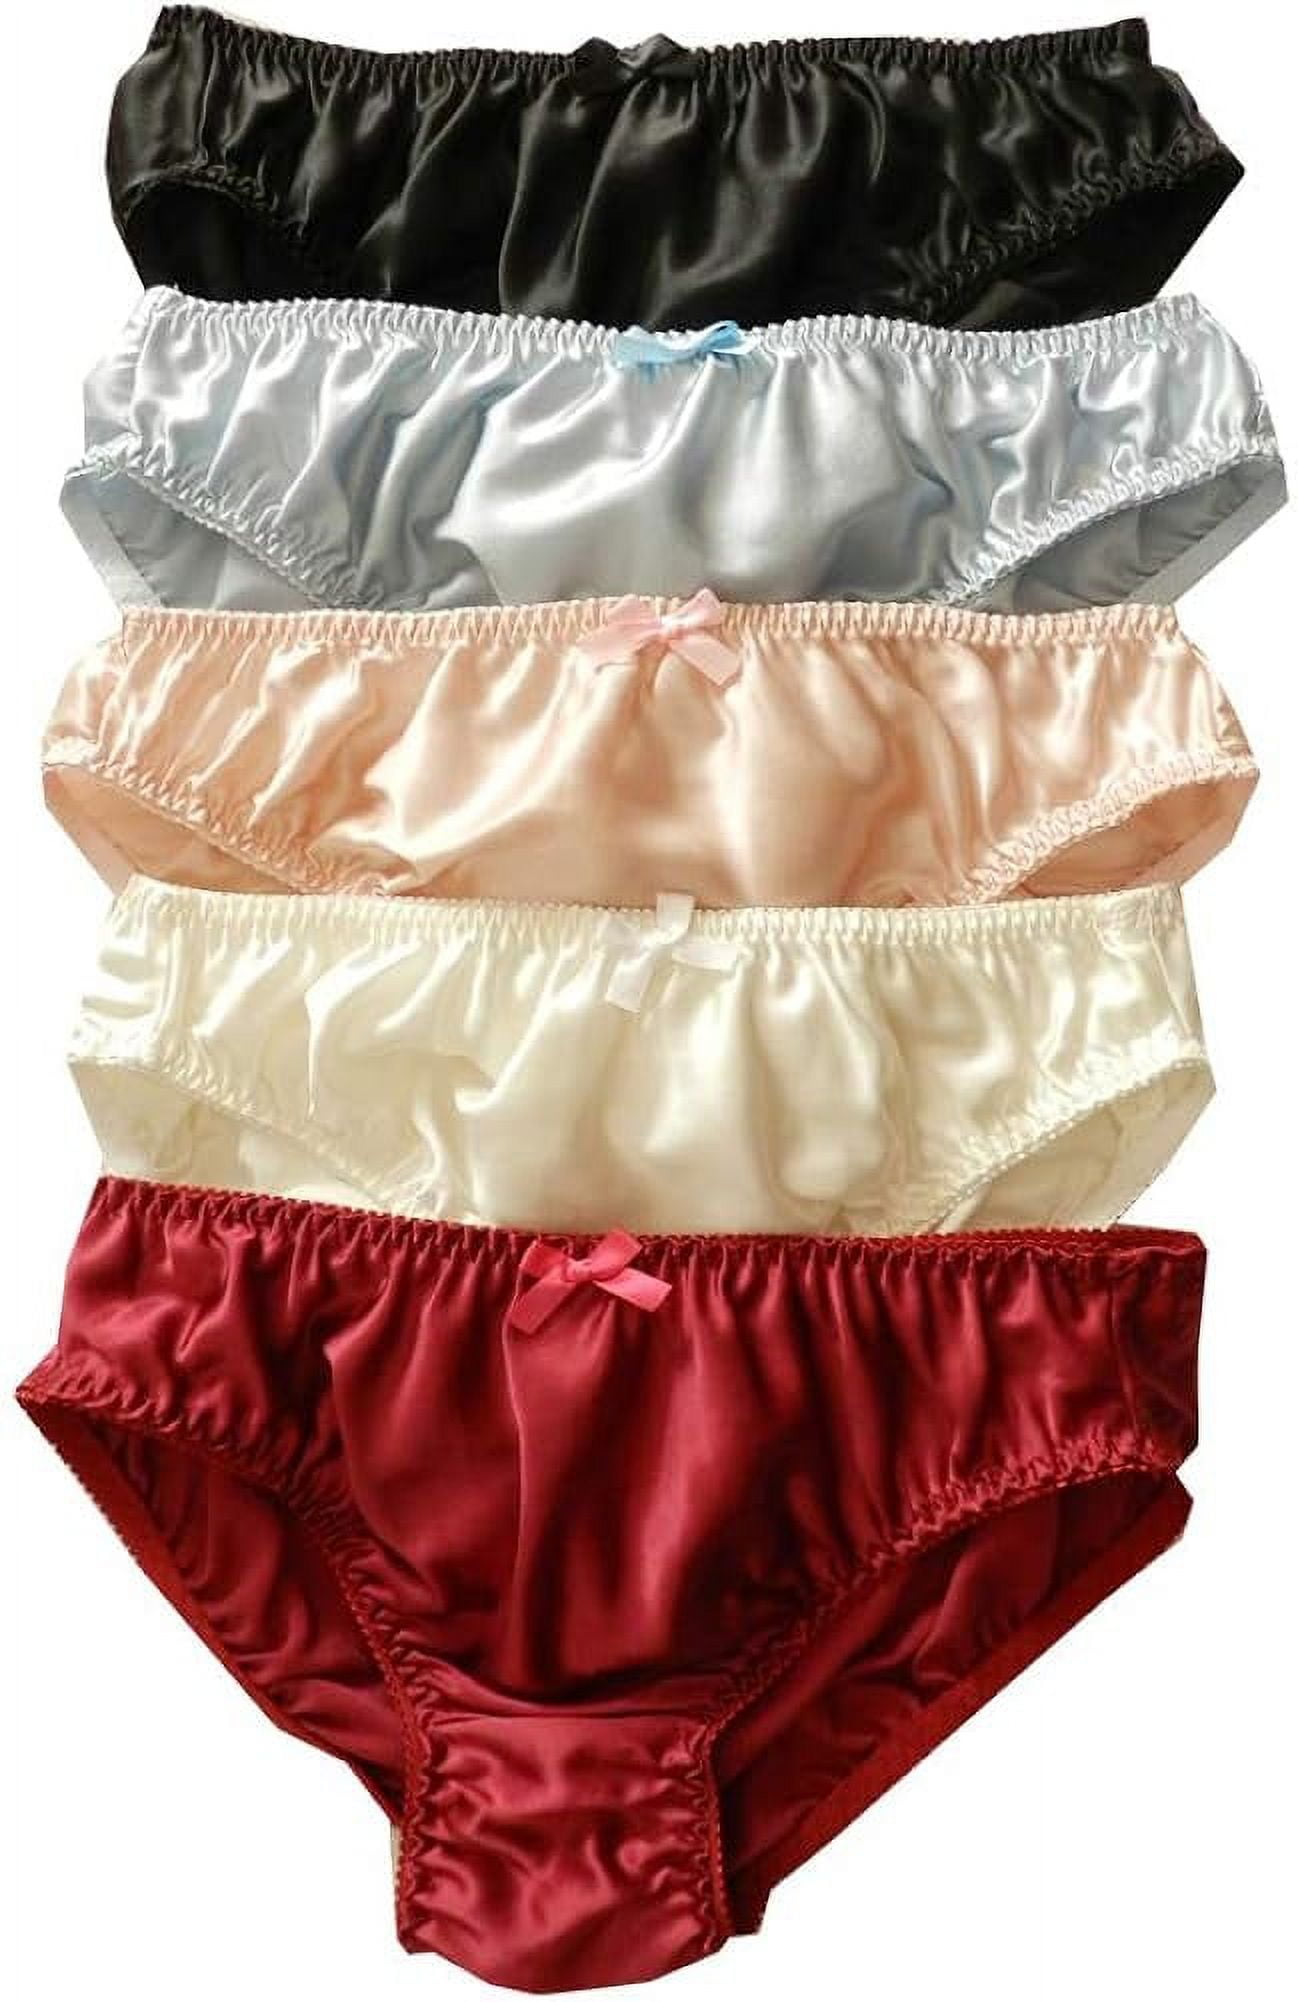 Yavorrs Women 100% Pure Mulberry Silk Panties Briefs Soft lacy Underwear (4  Pack)